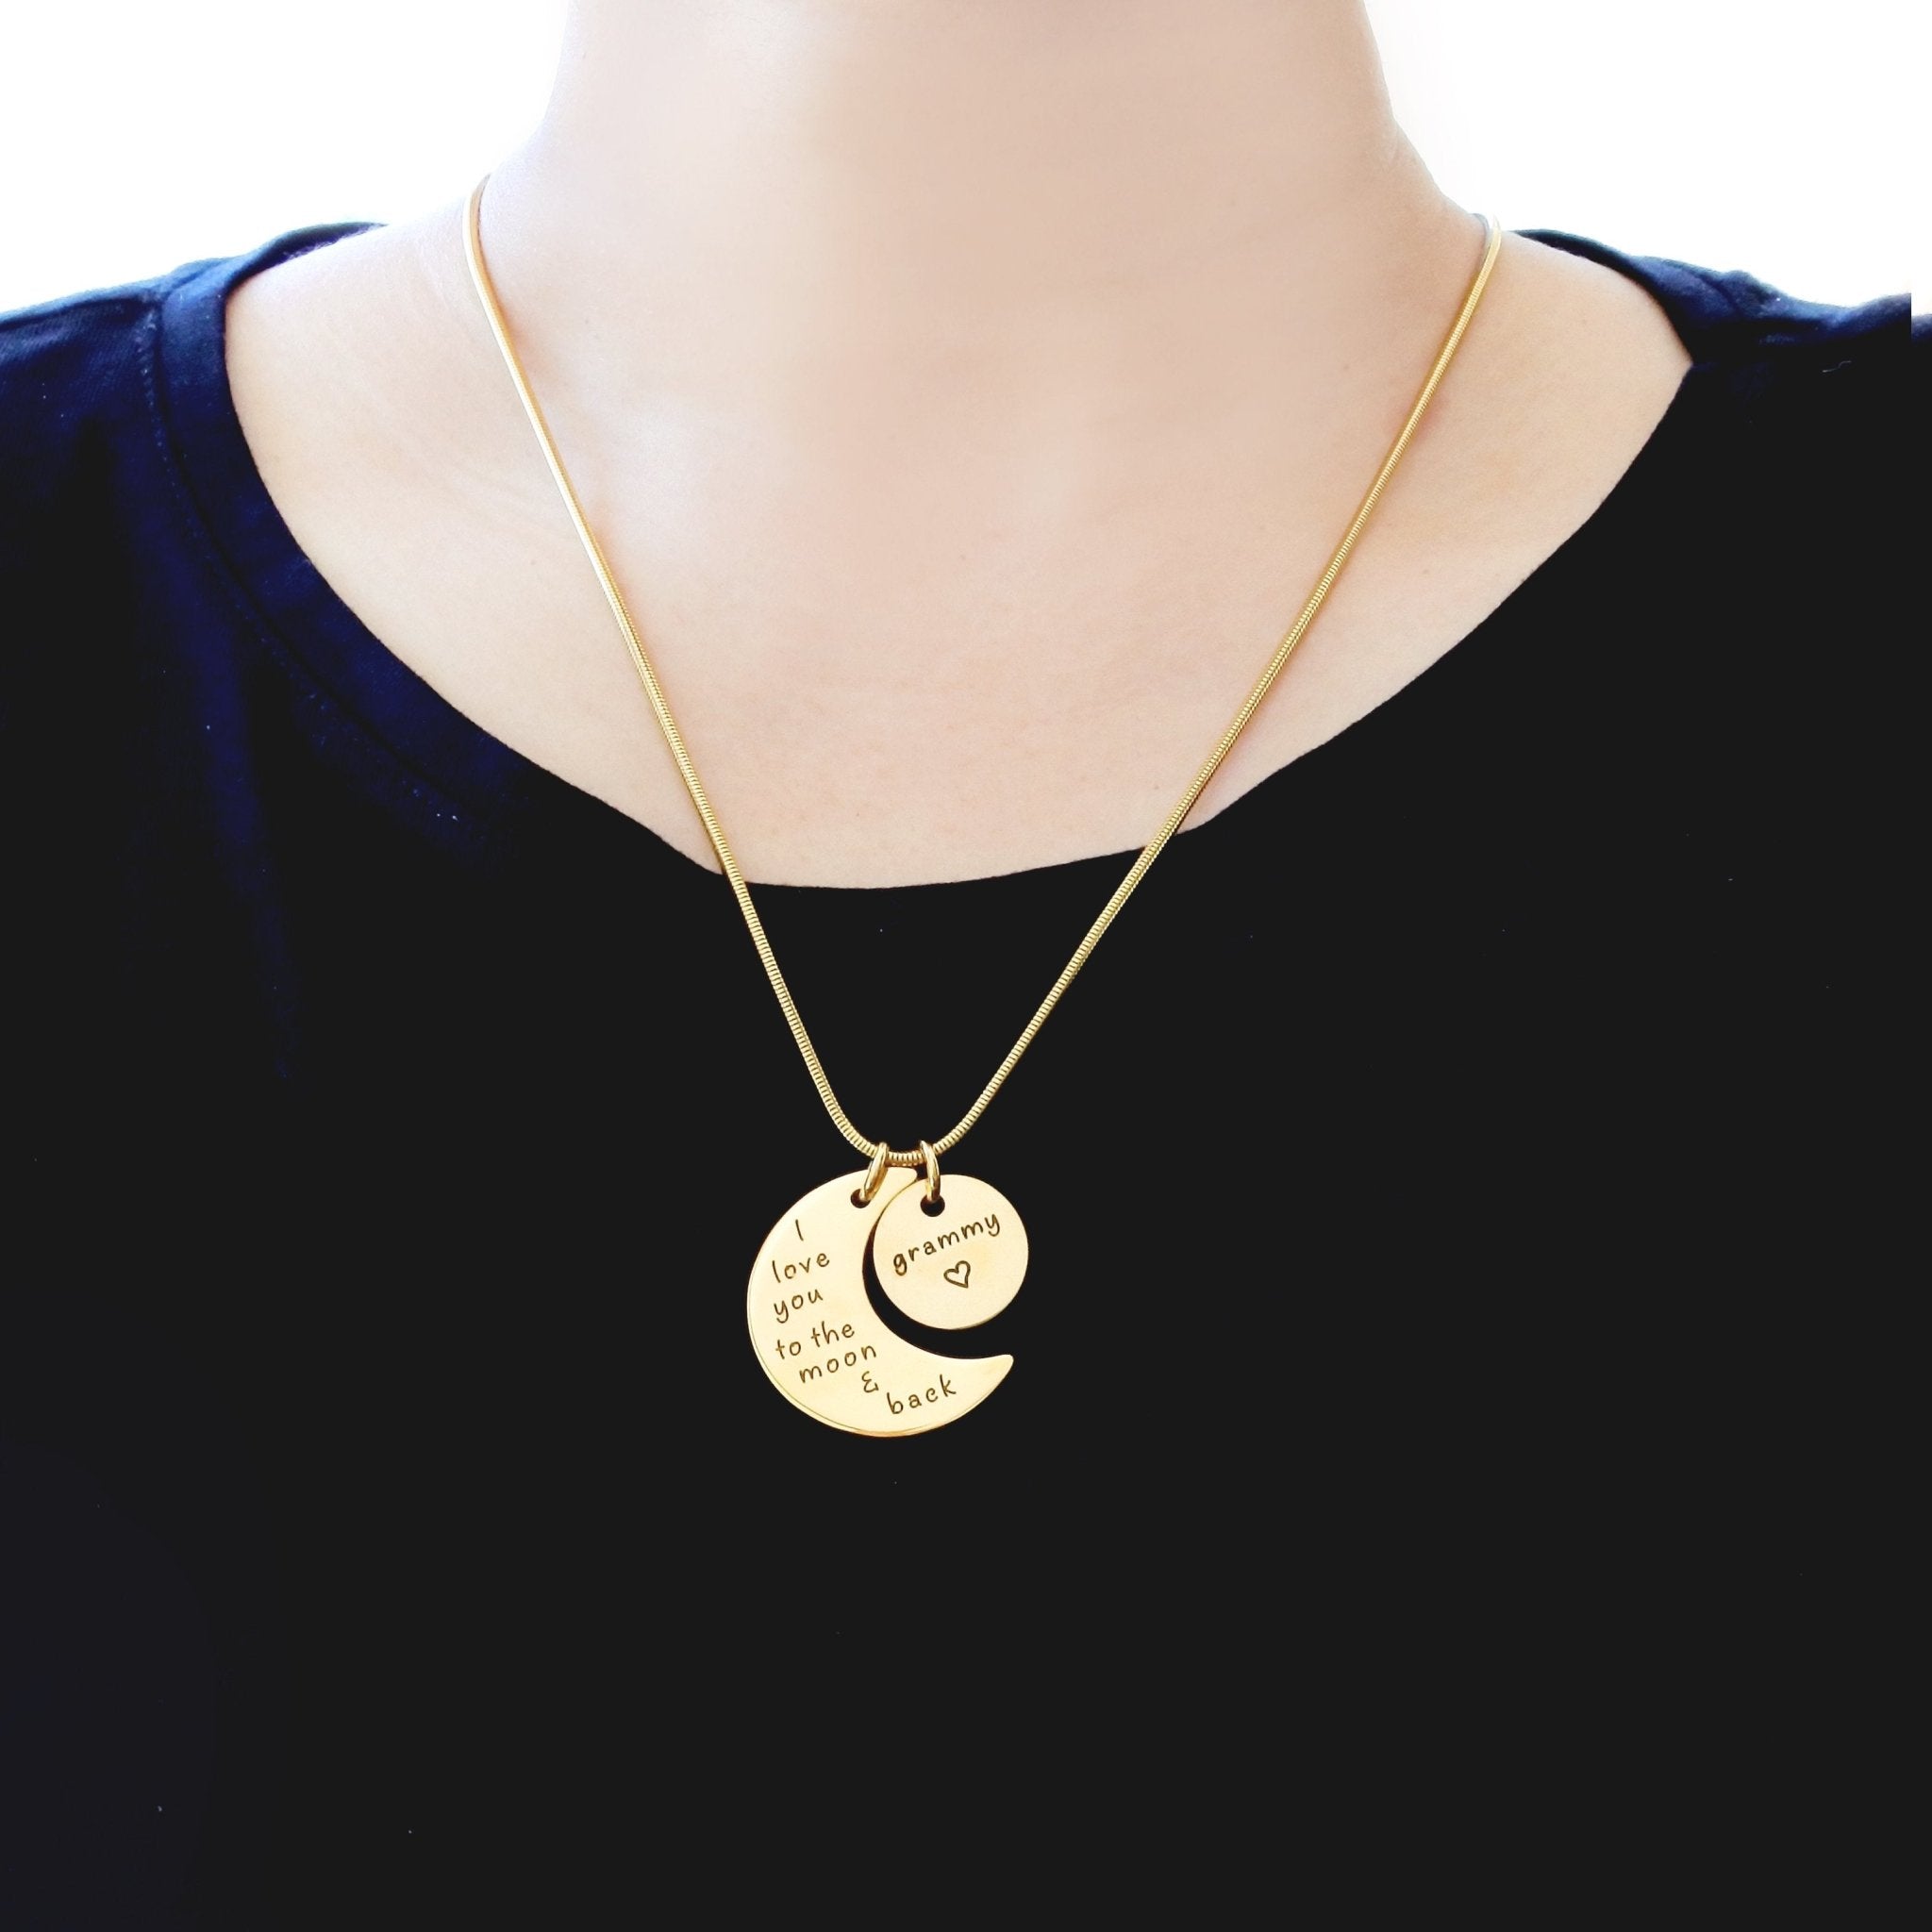 Moon and Back Necklace - Mothers Jewellery by Belle Fever